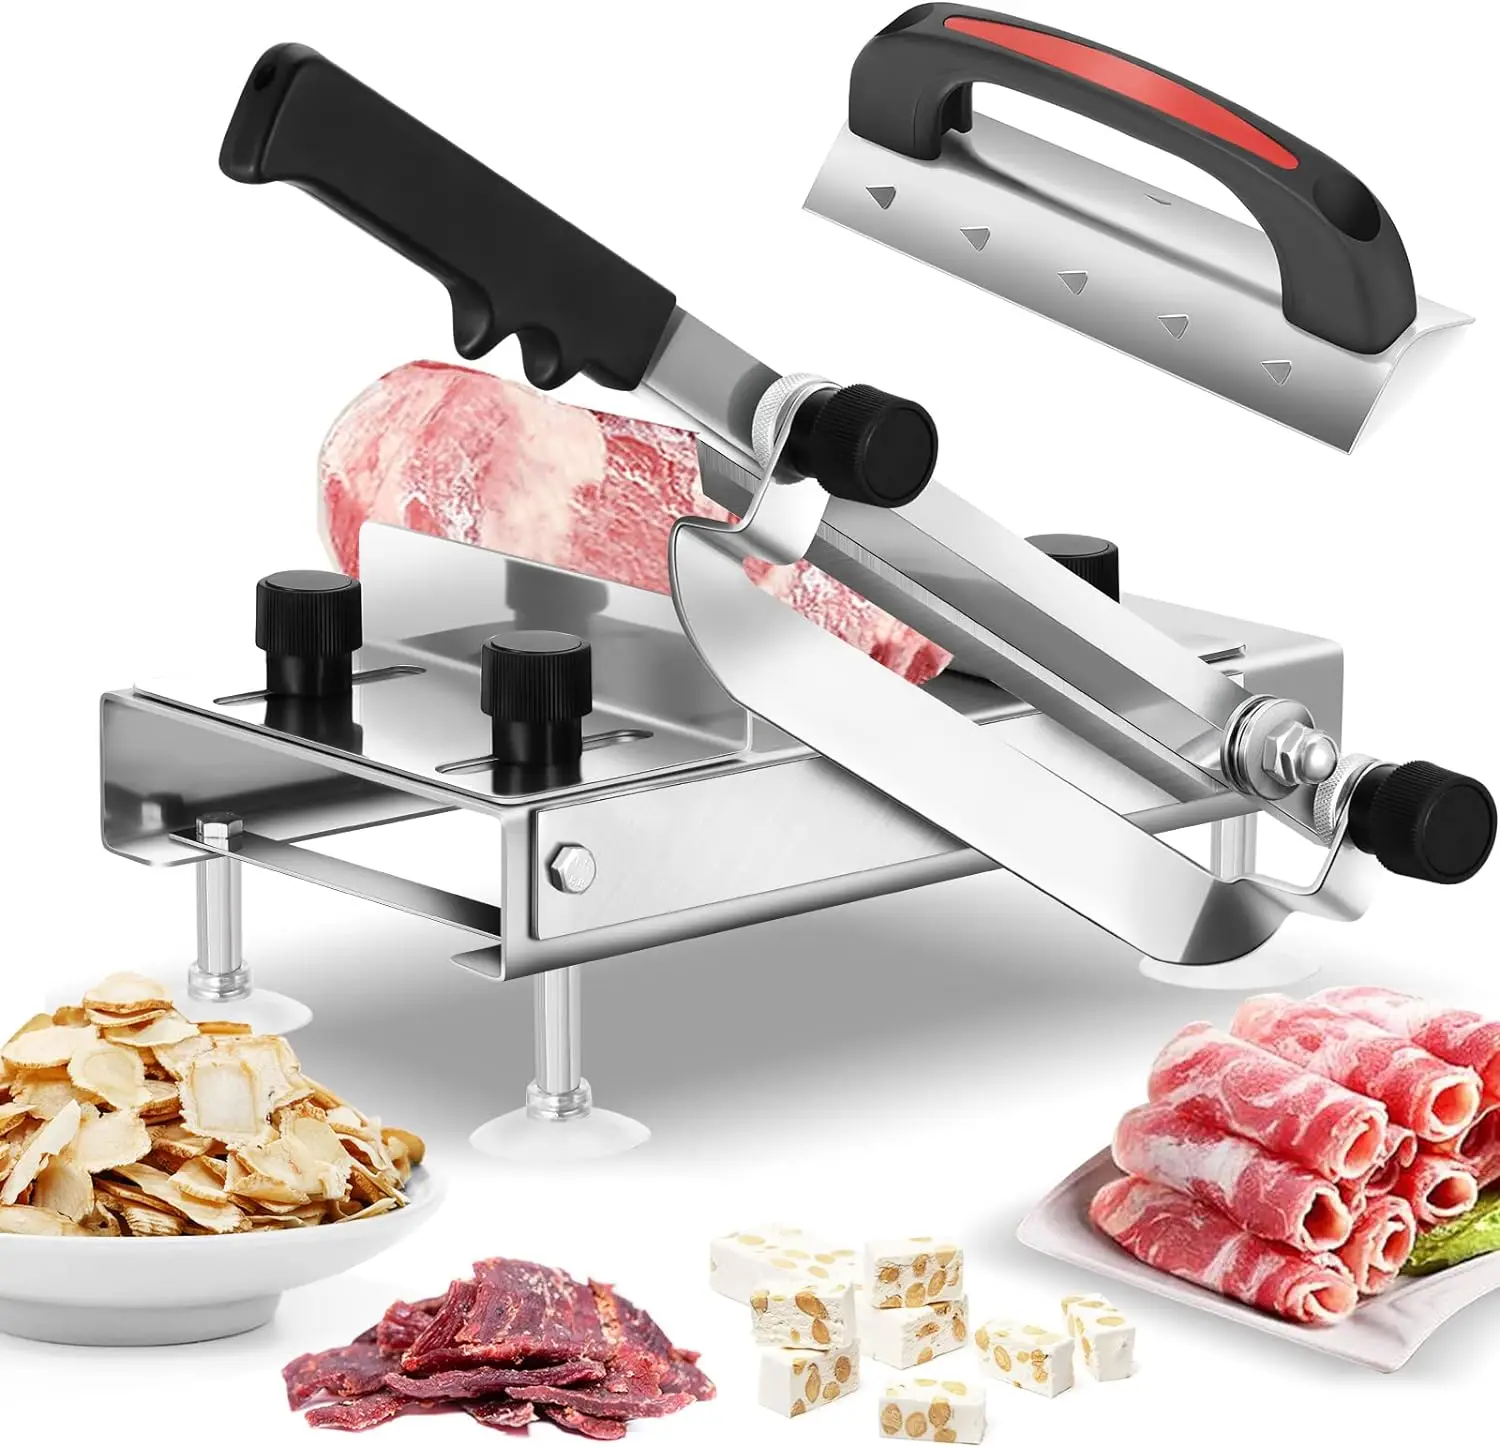 

Slicer Manual Meat Slicers Stainless Steel Ginseng for Home Use Beef Mutton Roll Bacon Cheese Nougat Deli Shabu Shabu Hotpot Ma